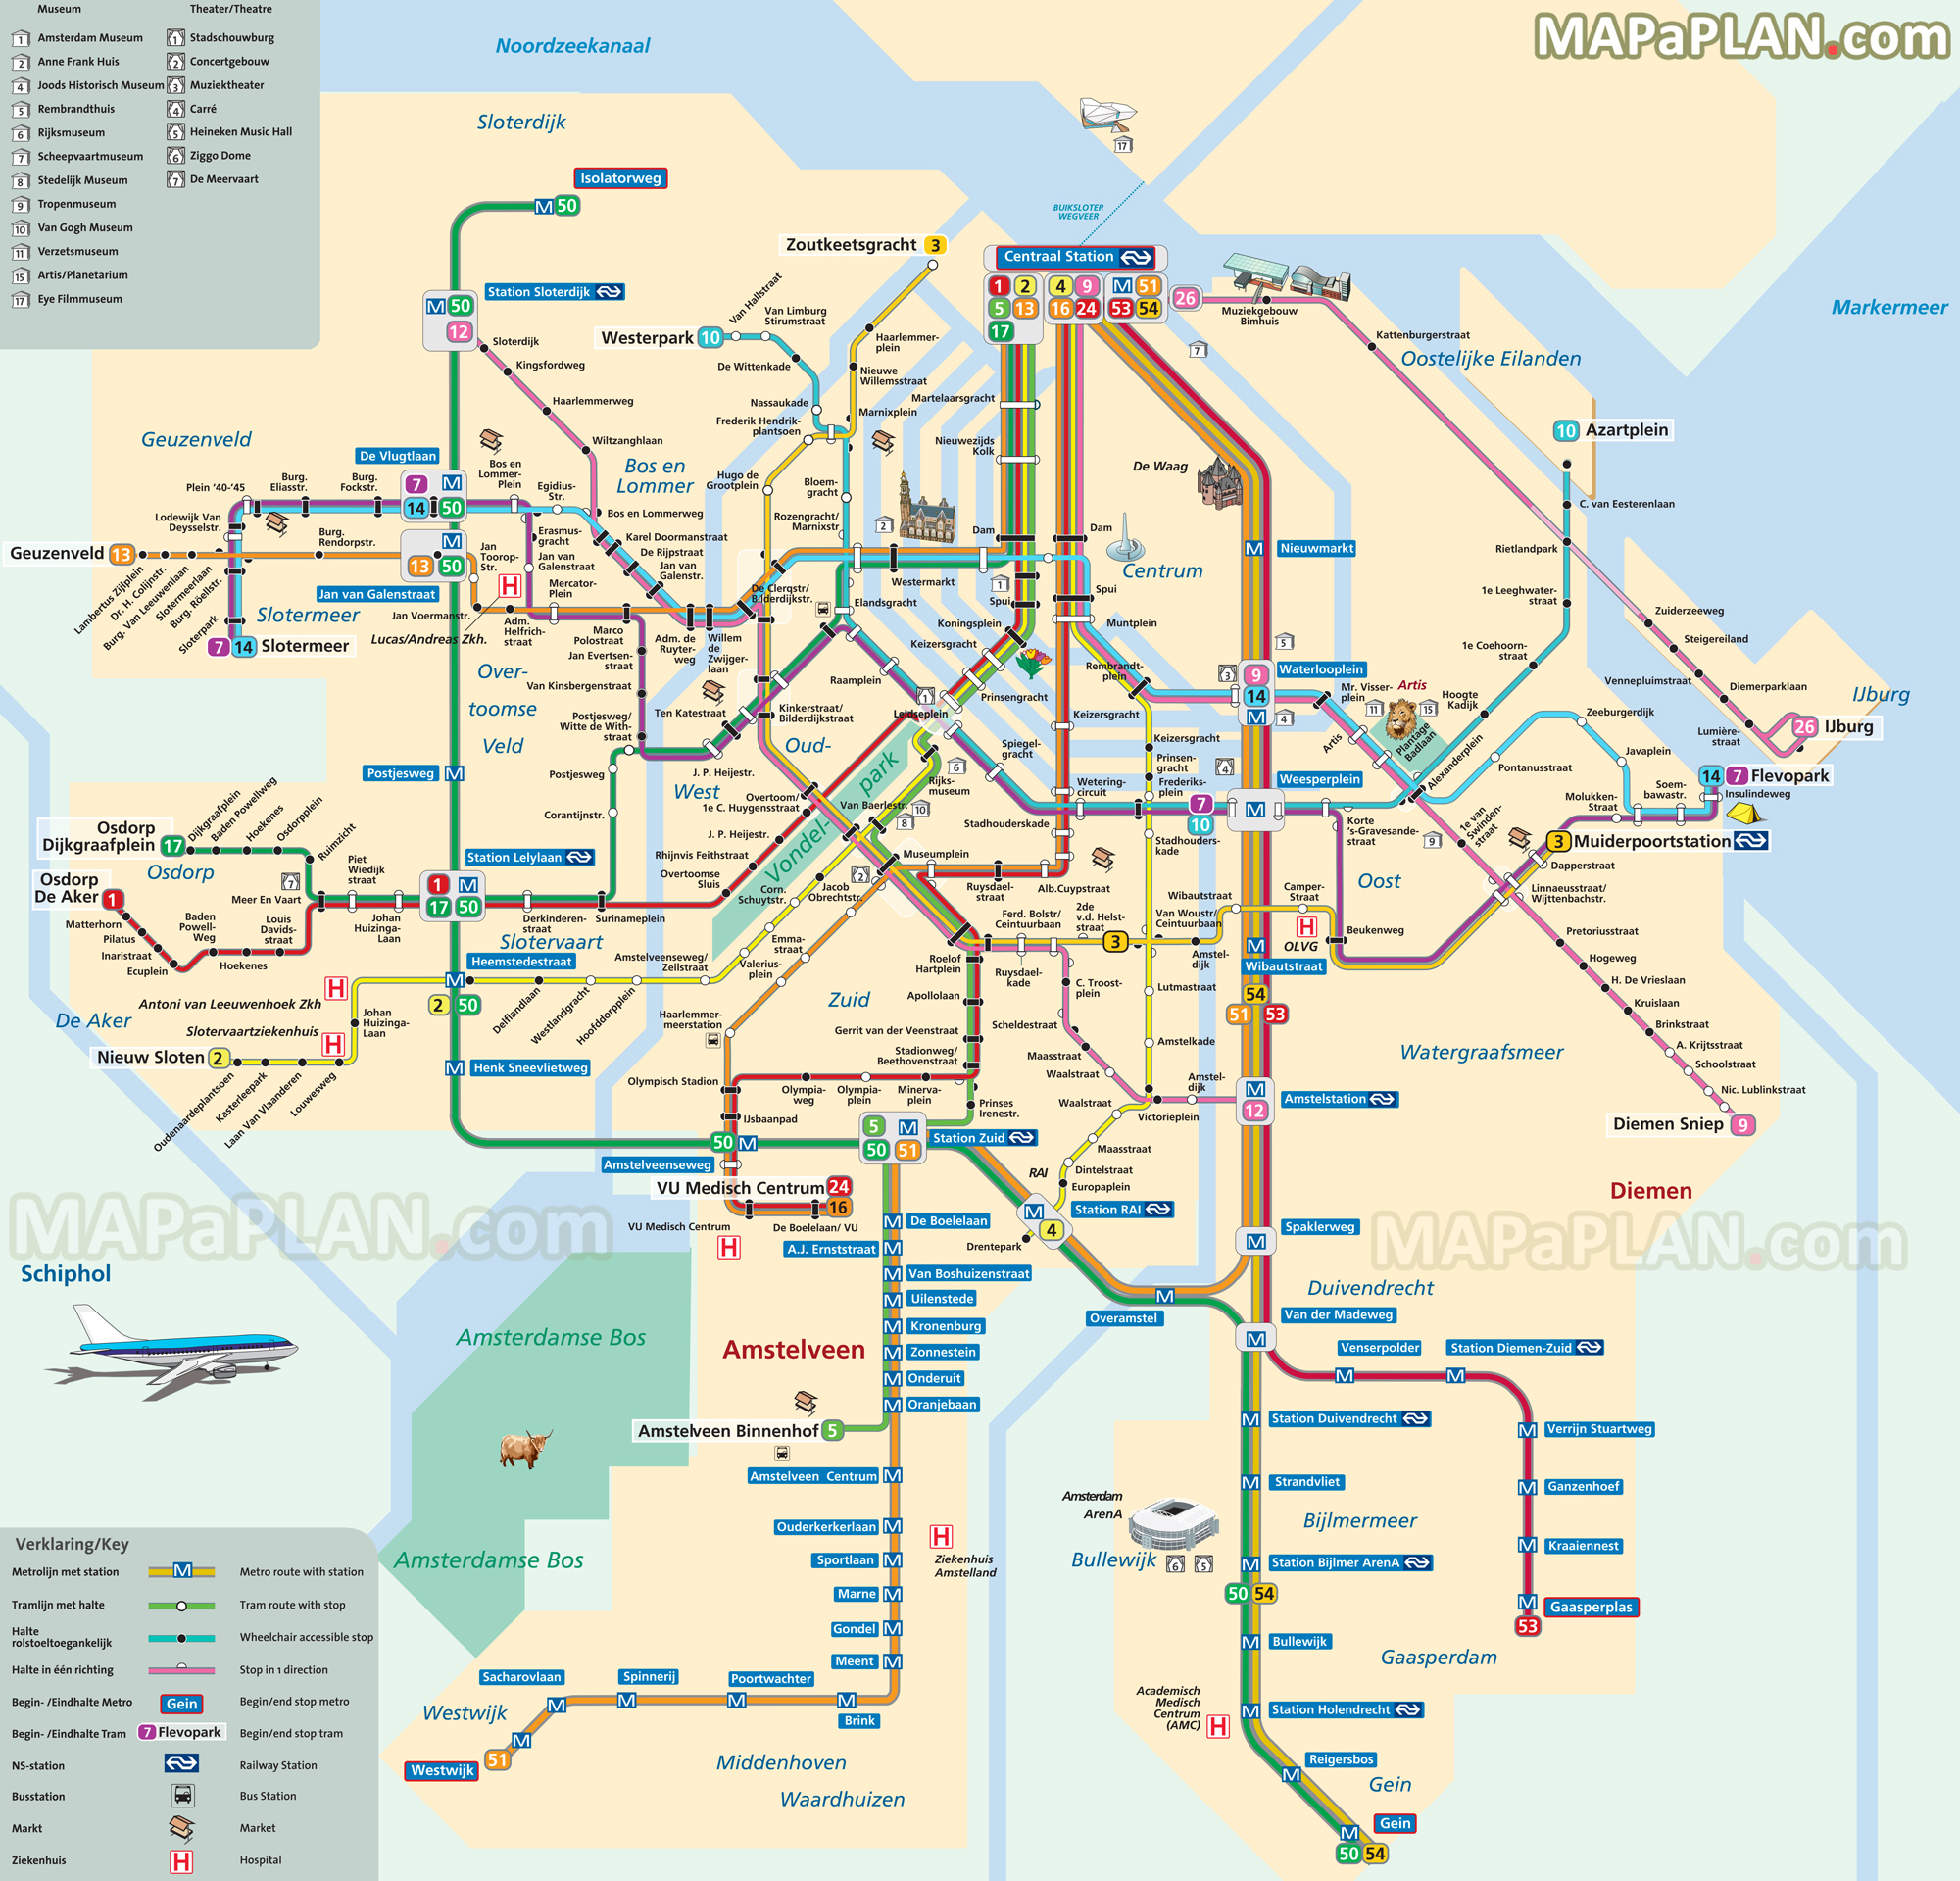 Tram metro subway underground tube English plan with best museums theatres Amsterdam top tourist attractions map